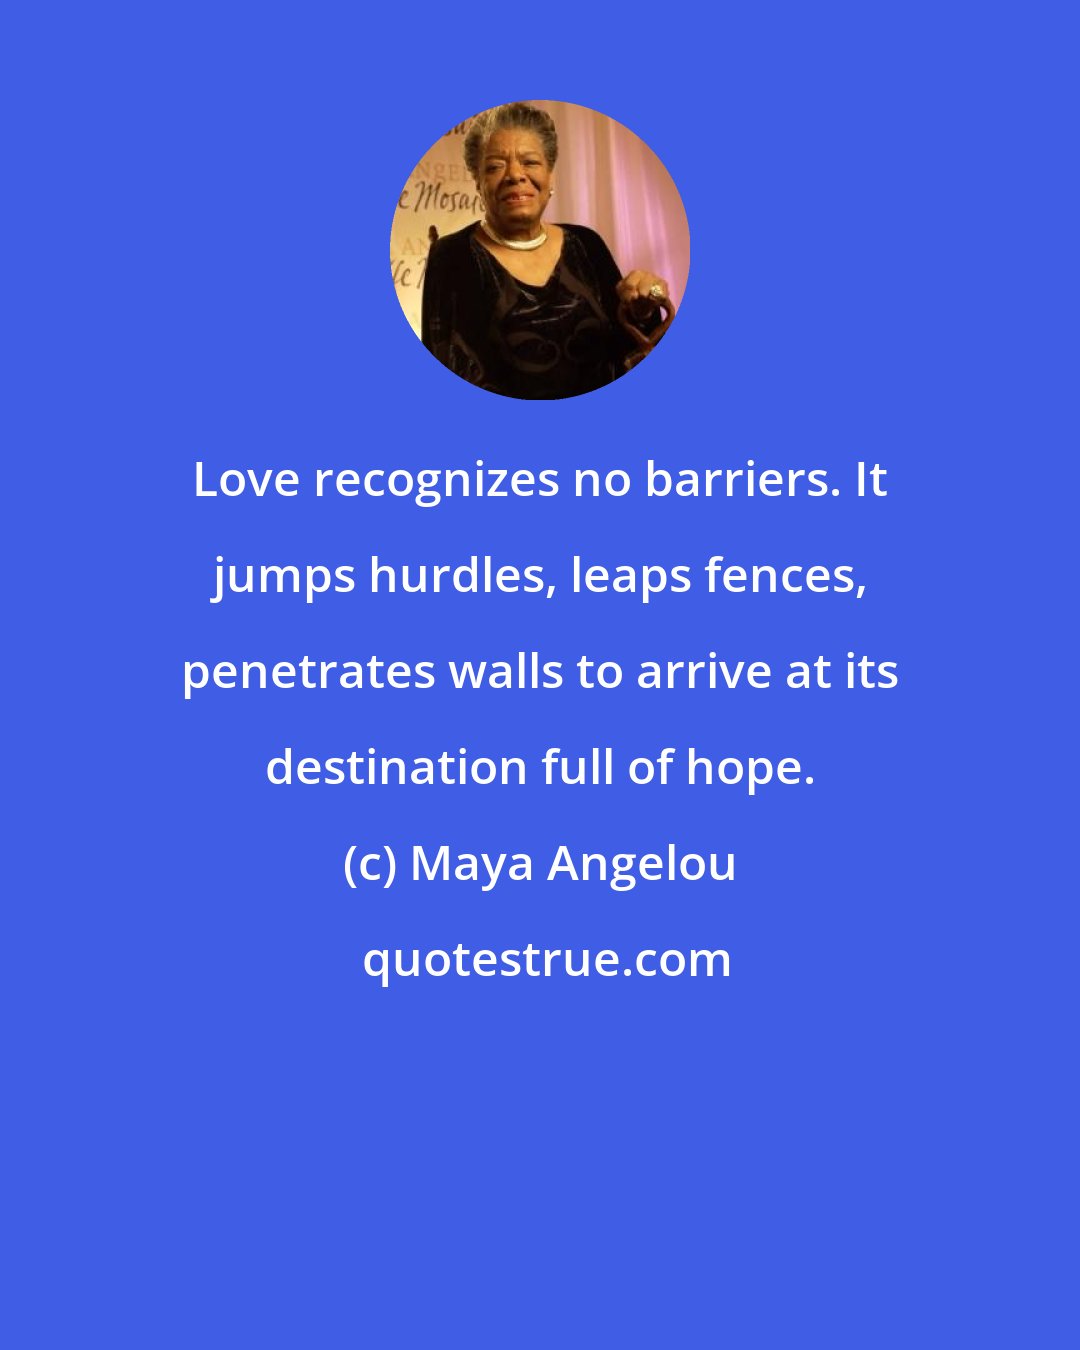 Maya Angelou: Love recognizes no barriers. It jumps hurdles, leaps fences, penetrates walls to arrive at its destination full of hope.